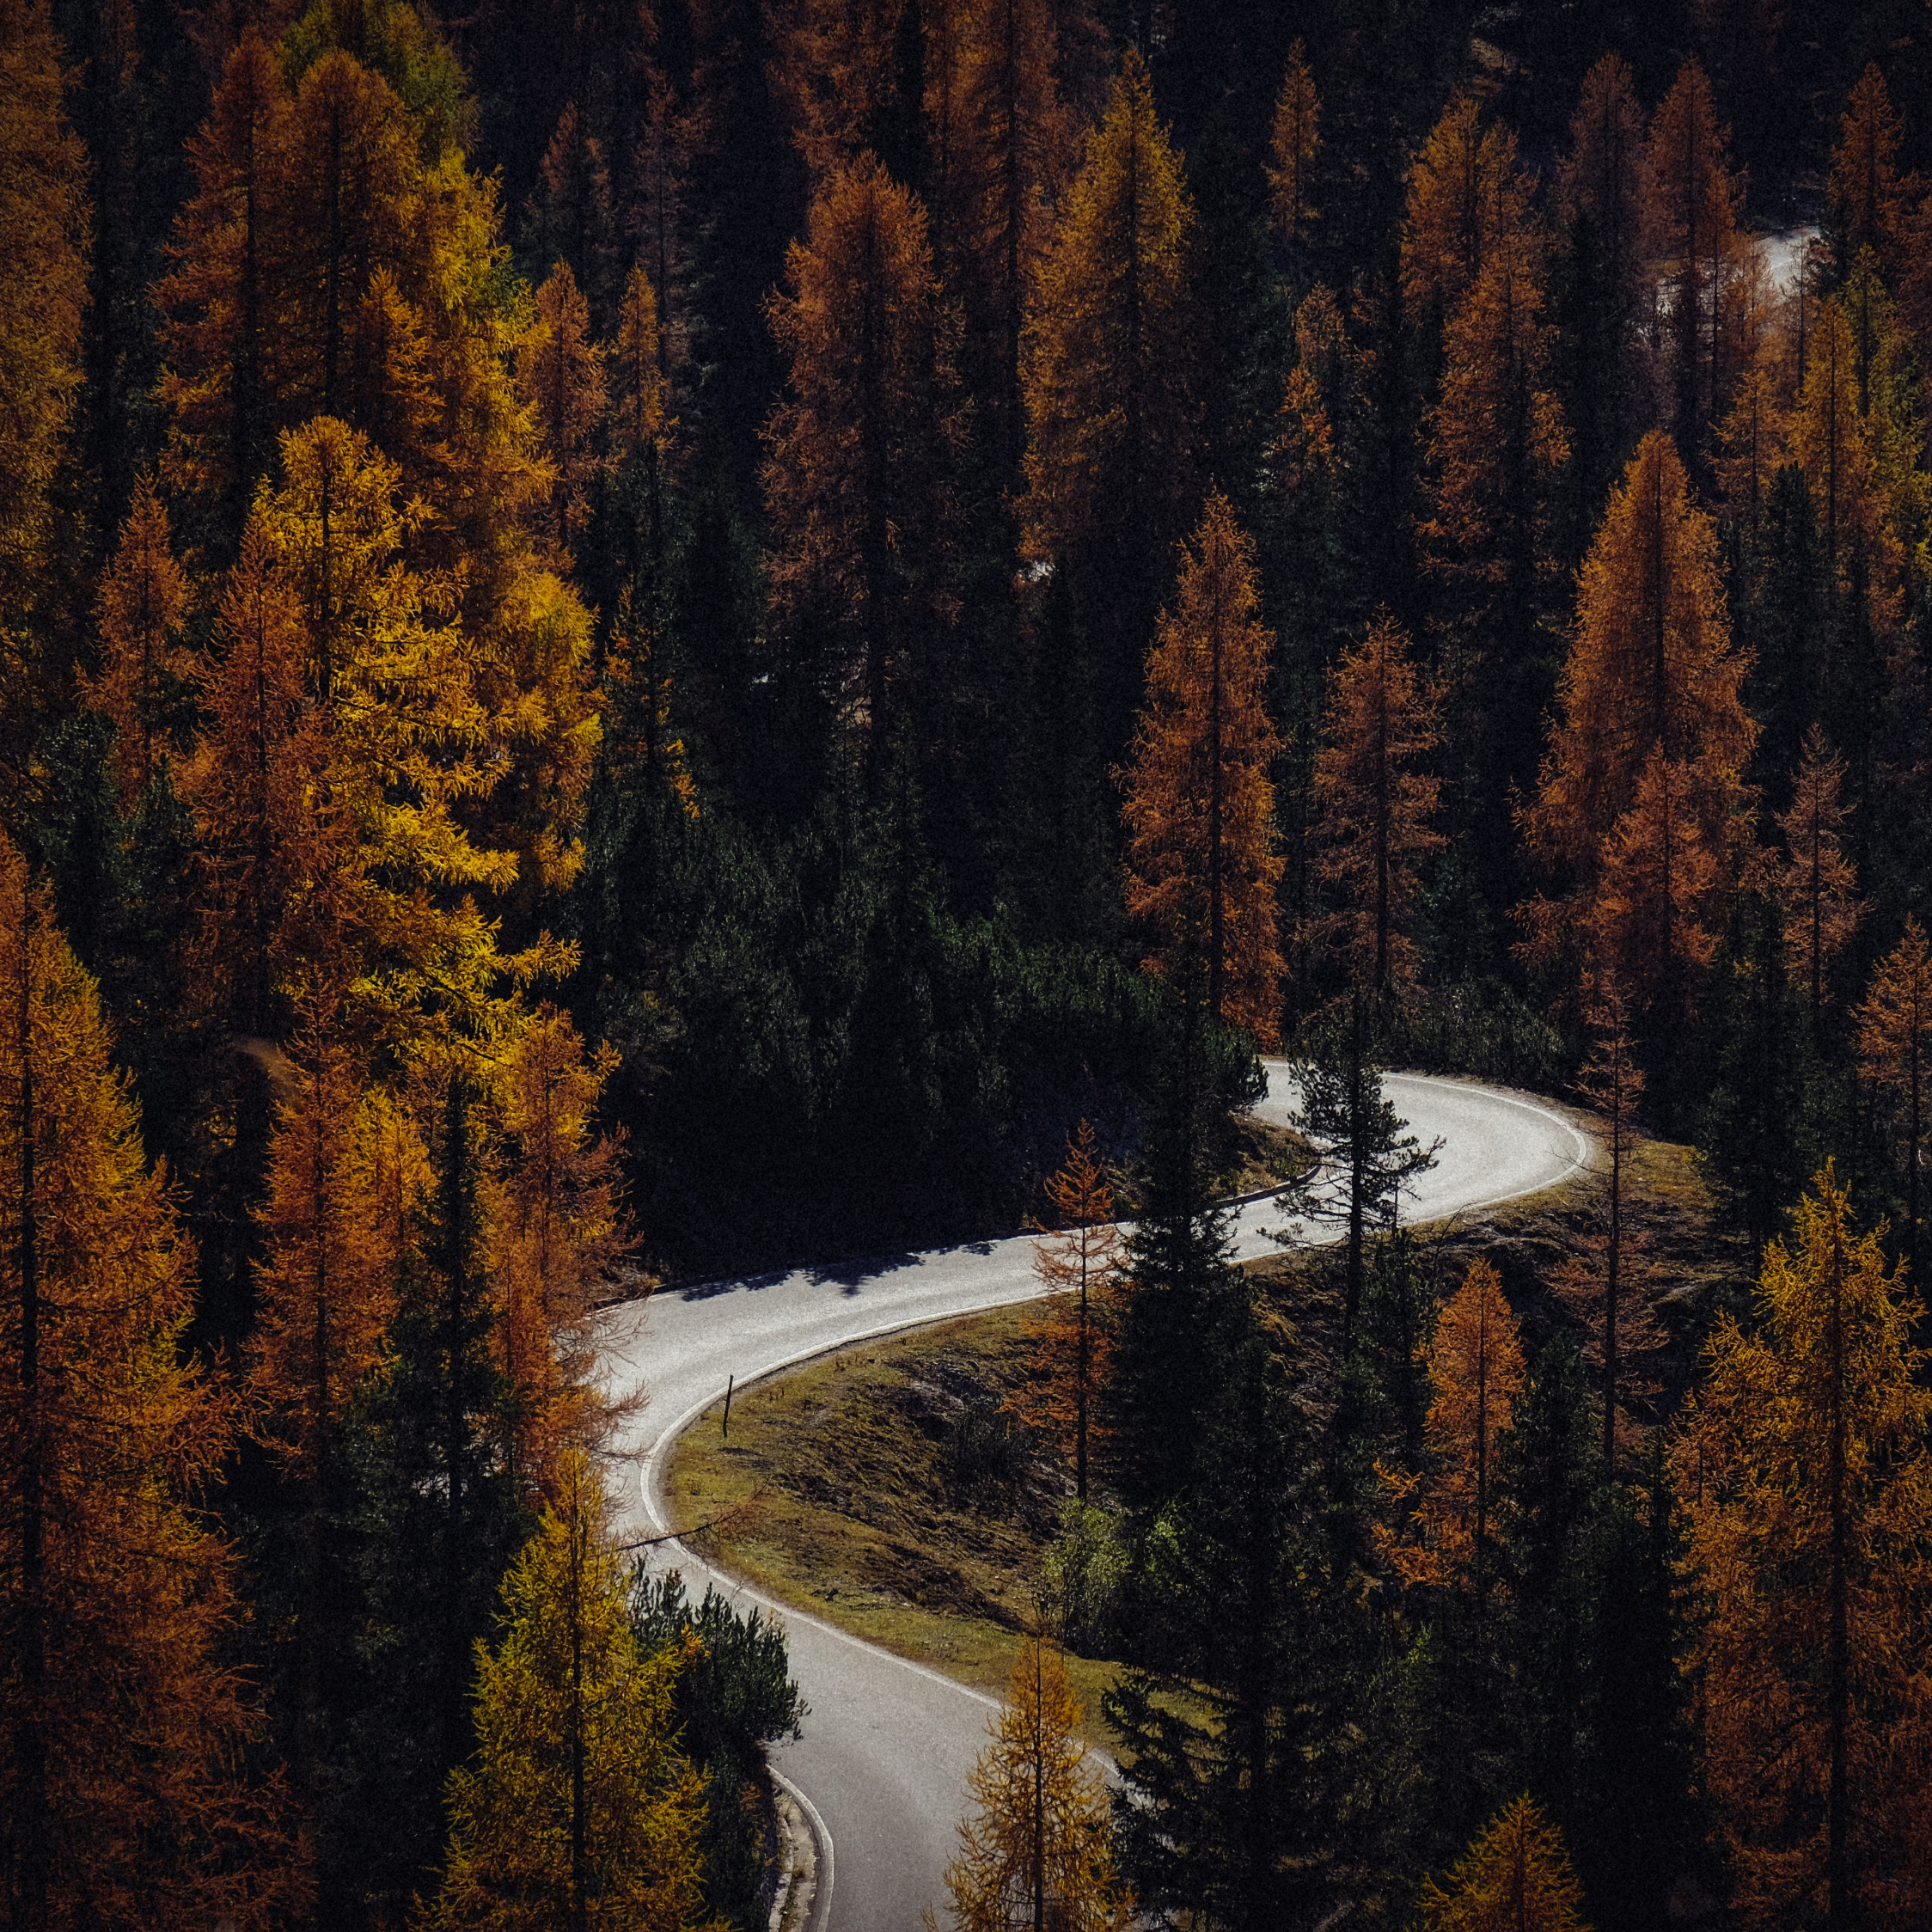 Download Autumn, road, turns, forest, nature wallpaper, 2248x iPad Air, iPad Air iPad iPad iPad mini iPad mini 3